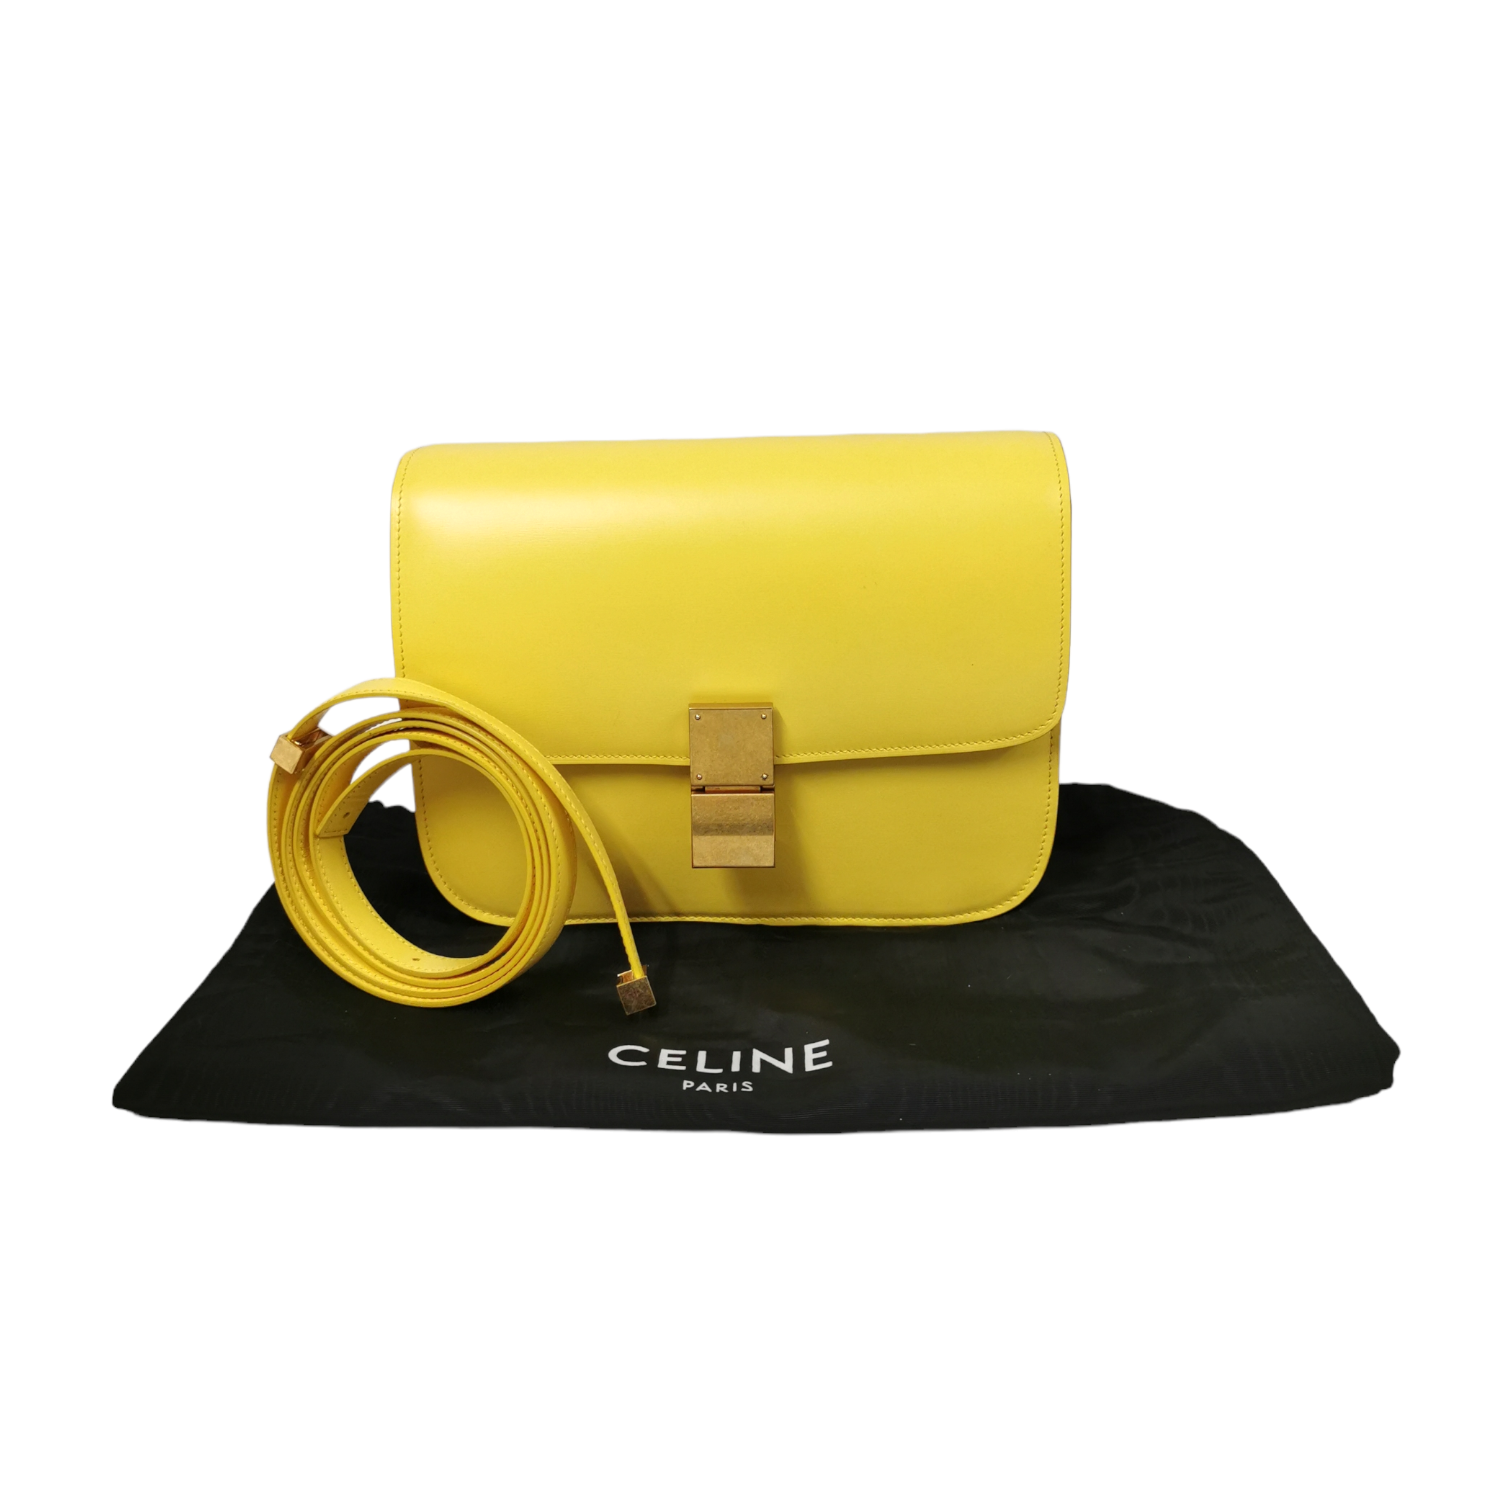 Cool box leather handbag Delvaux Yellow in Leather - 42183237